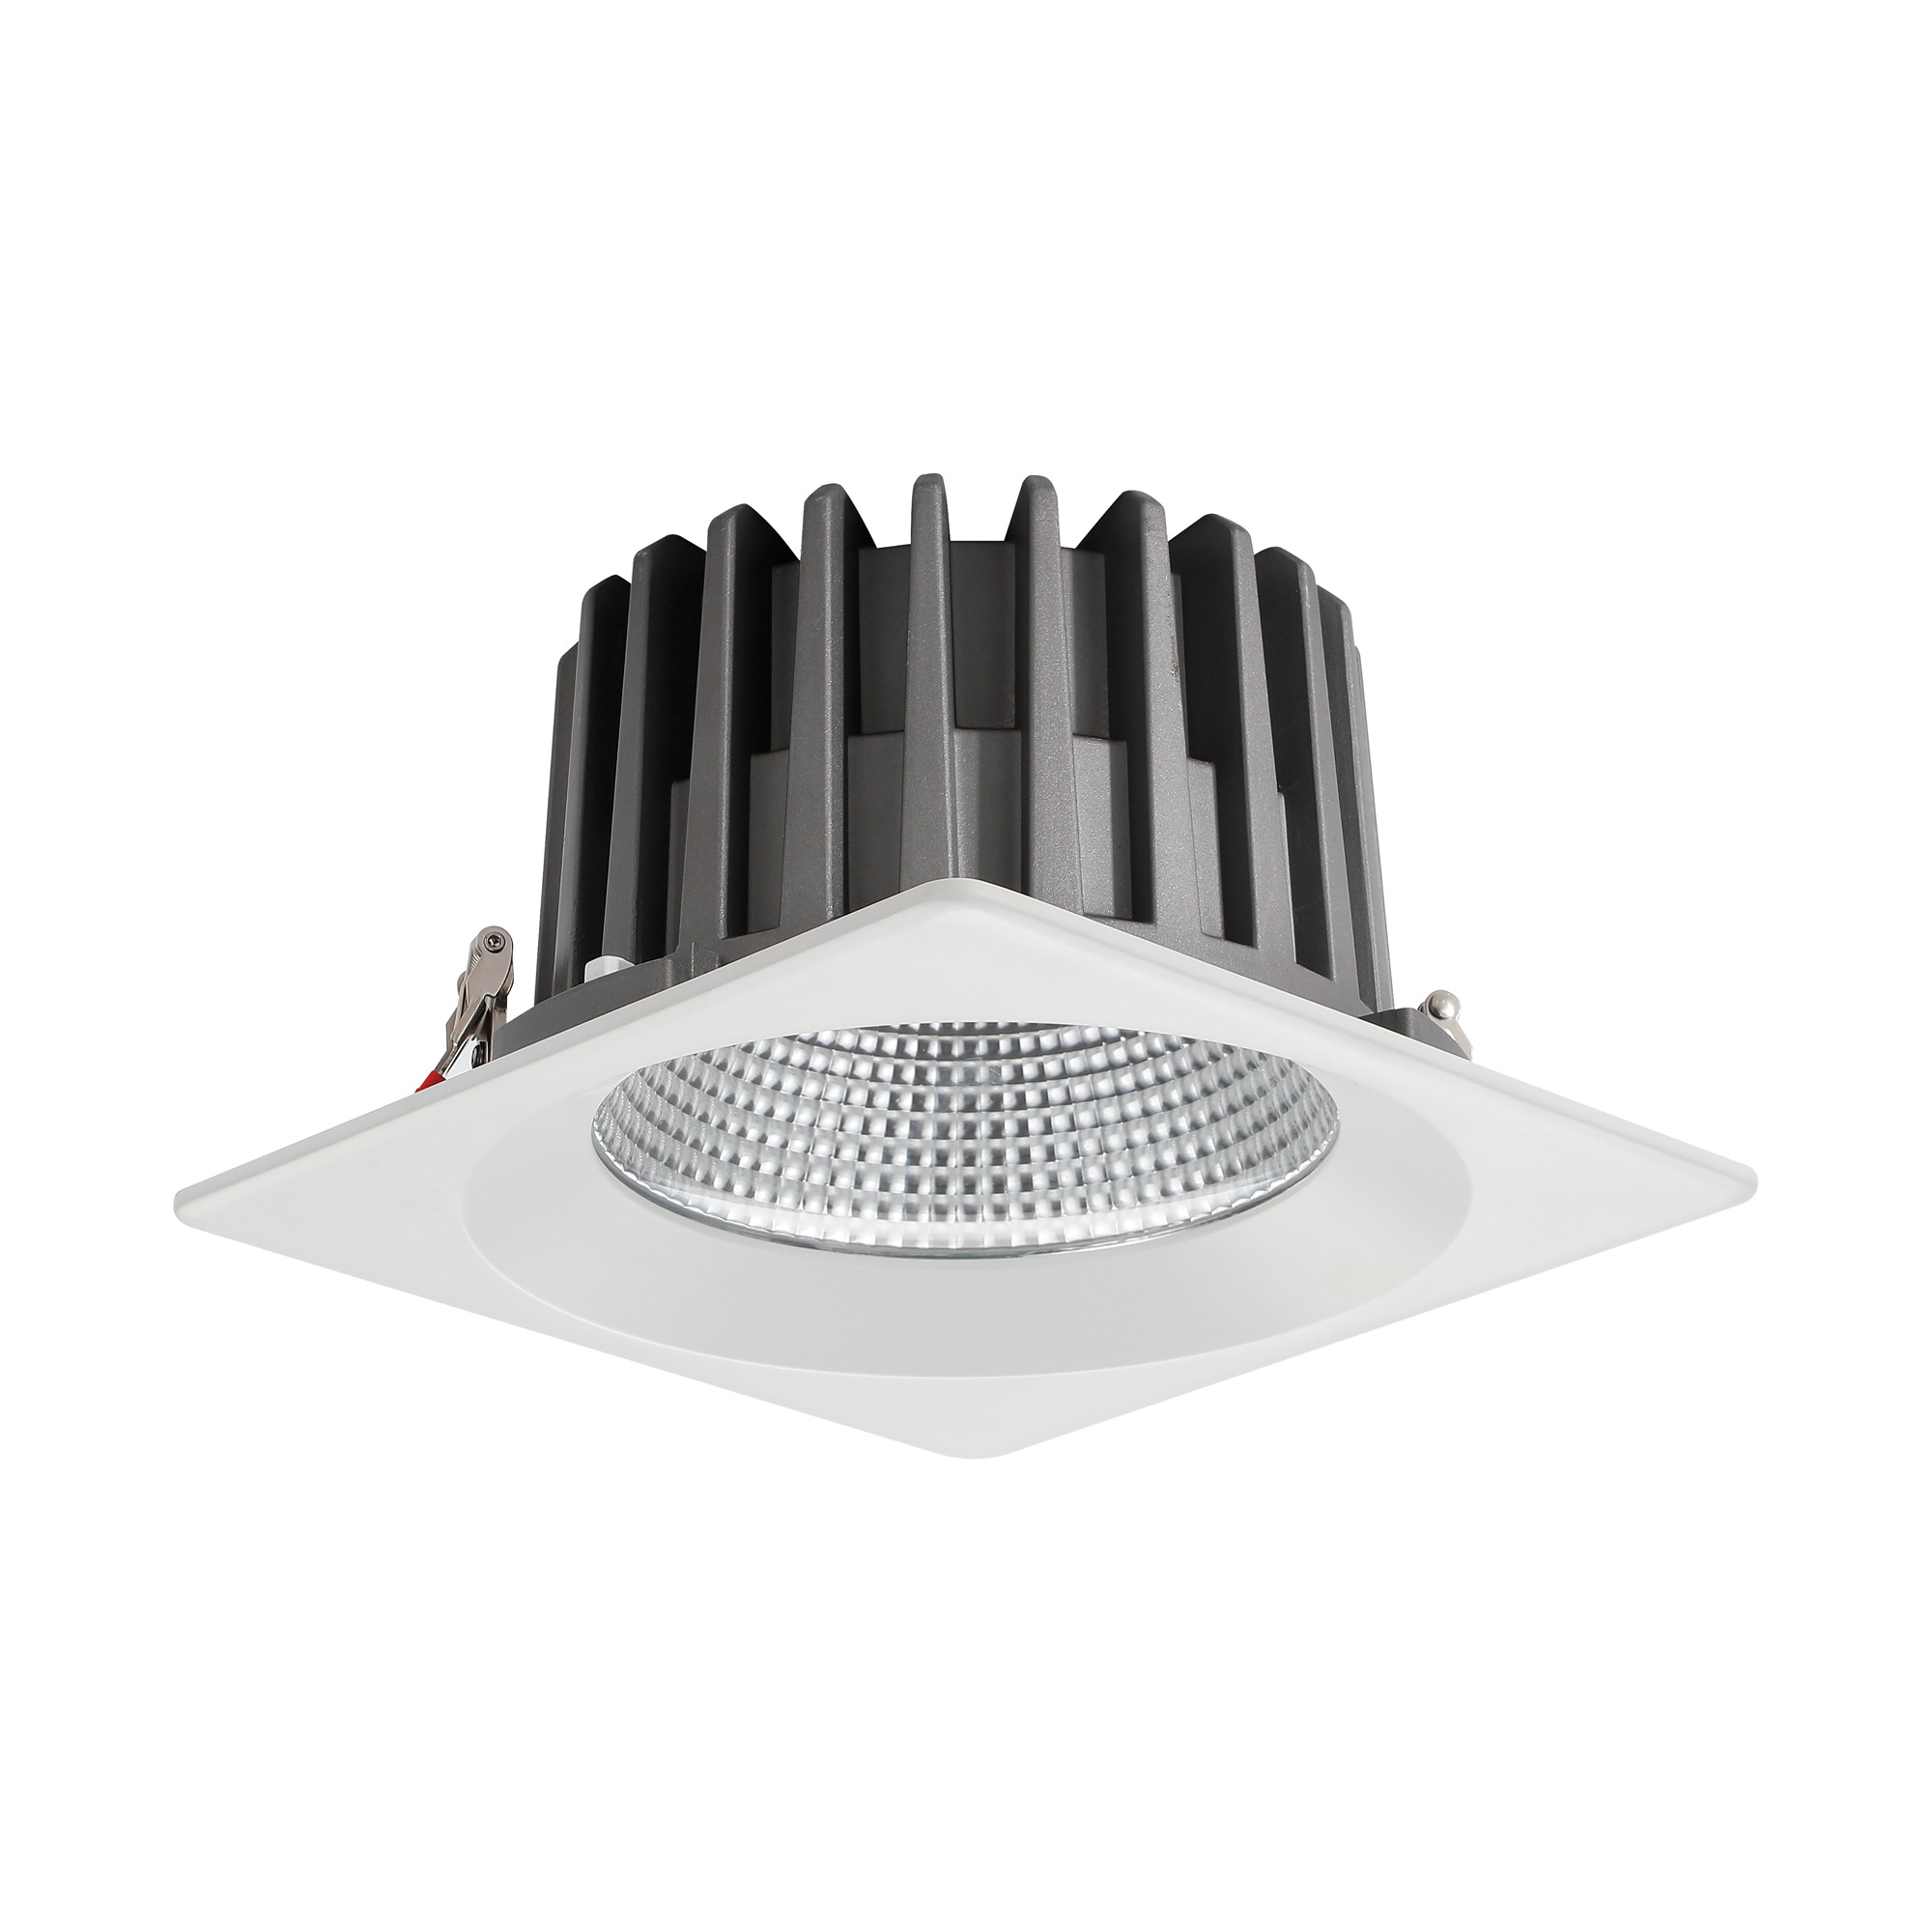 DL200083  Bionic 50; 50W; 1200mA; White Deep Square Recessed Downlight; 4400lm ;Cut Out 175mm; 50° ; 4000K; IP44; DRIVER INC.; 5yrs Warranty.